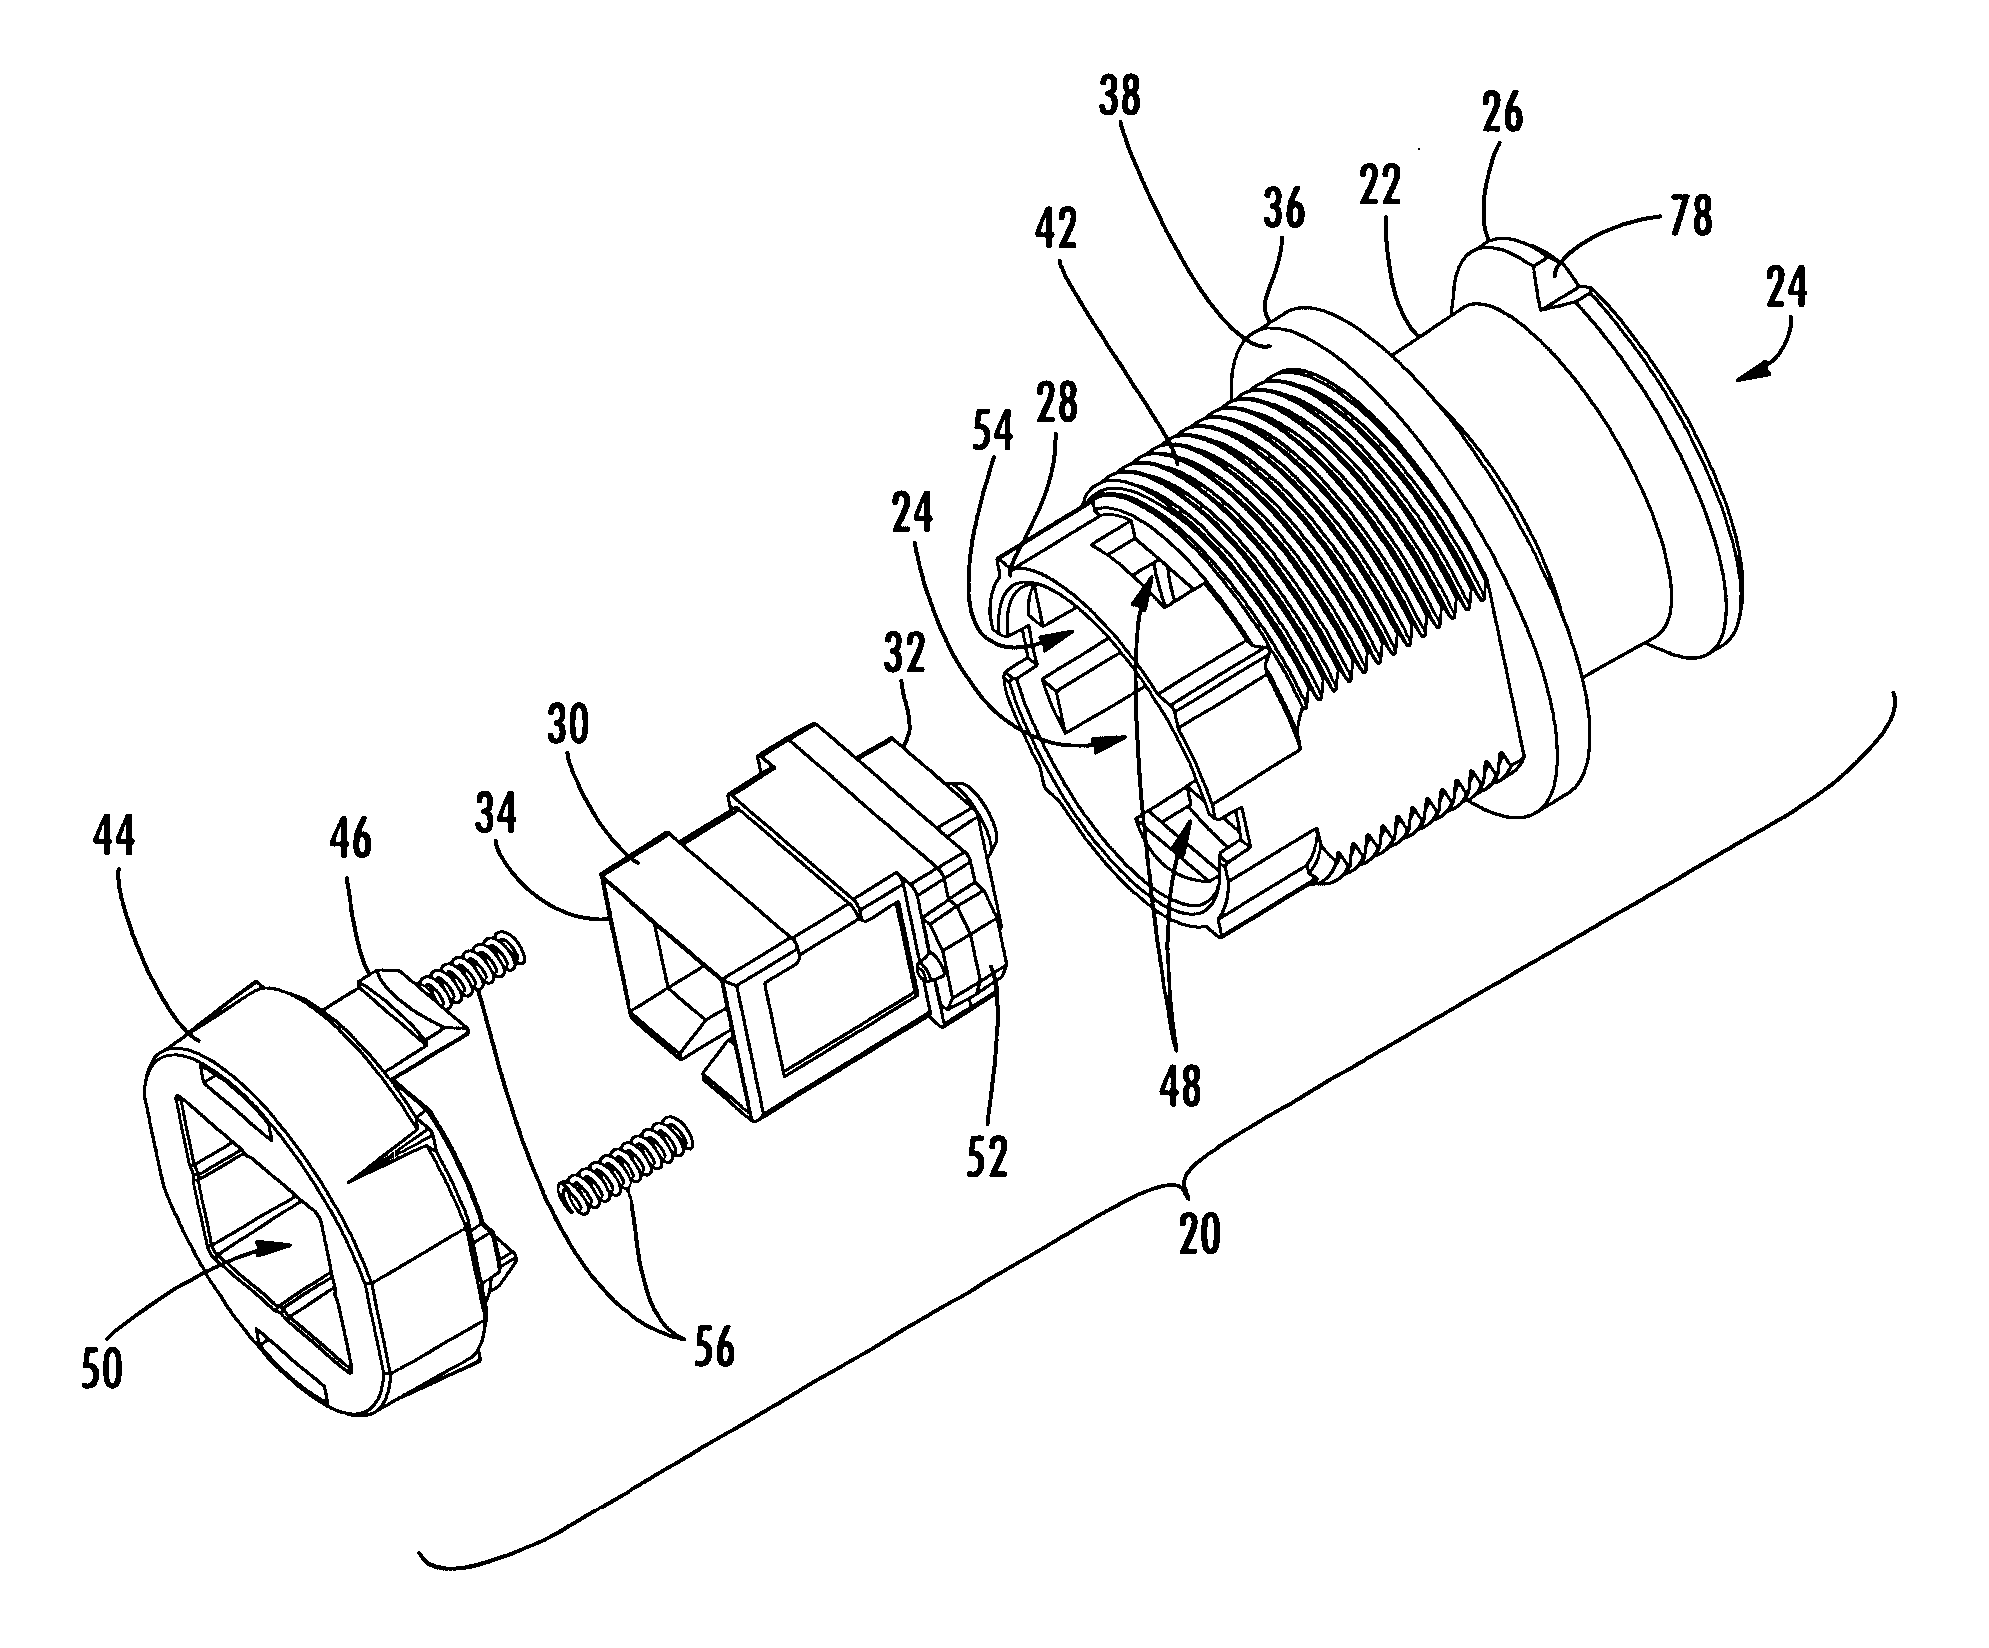 One-piece fiber optic receptacle having chamfer and alignment ribs